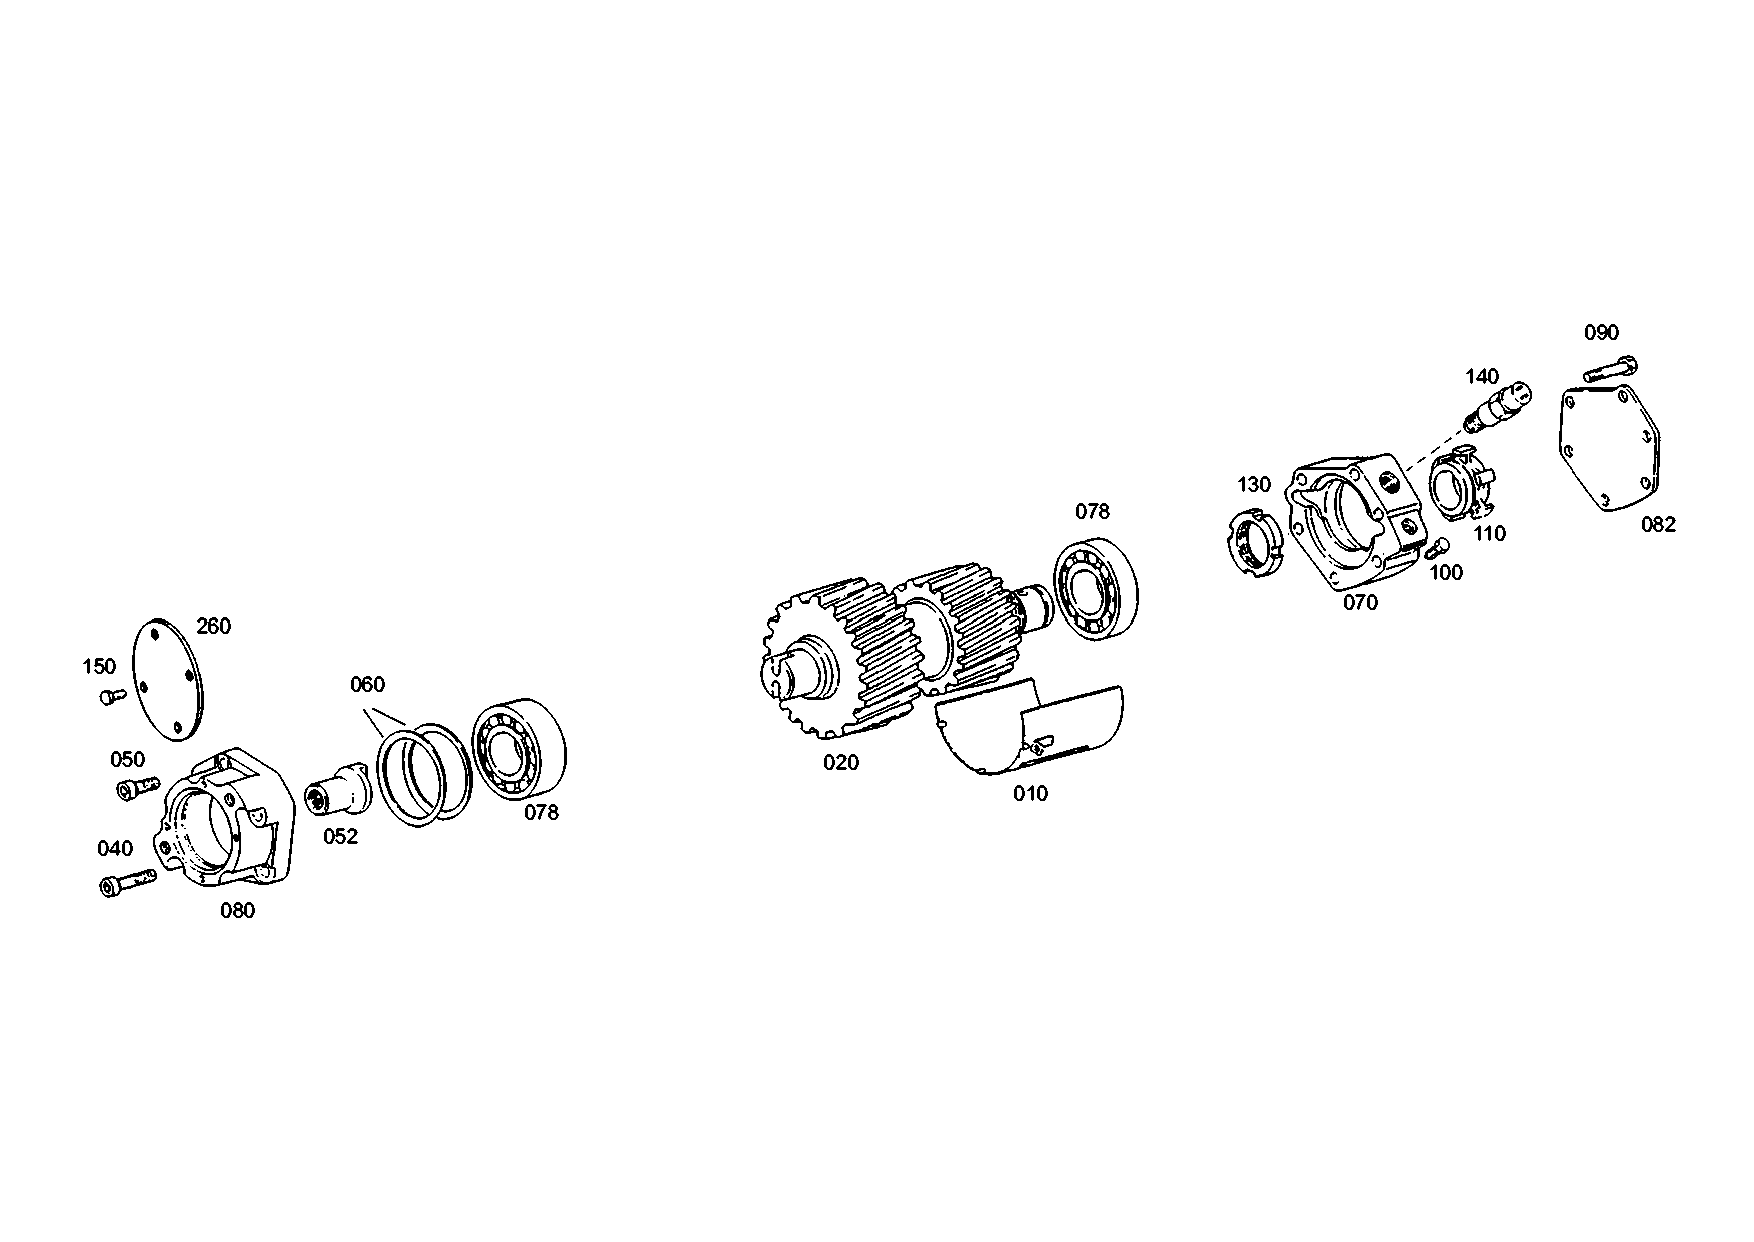 drawing for SKF BC1B326548C - CYL. ROLLER BEARING (figure 3)